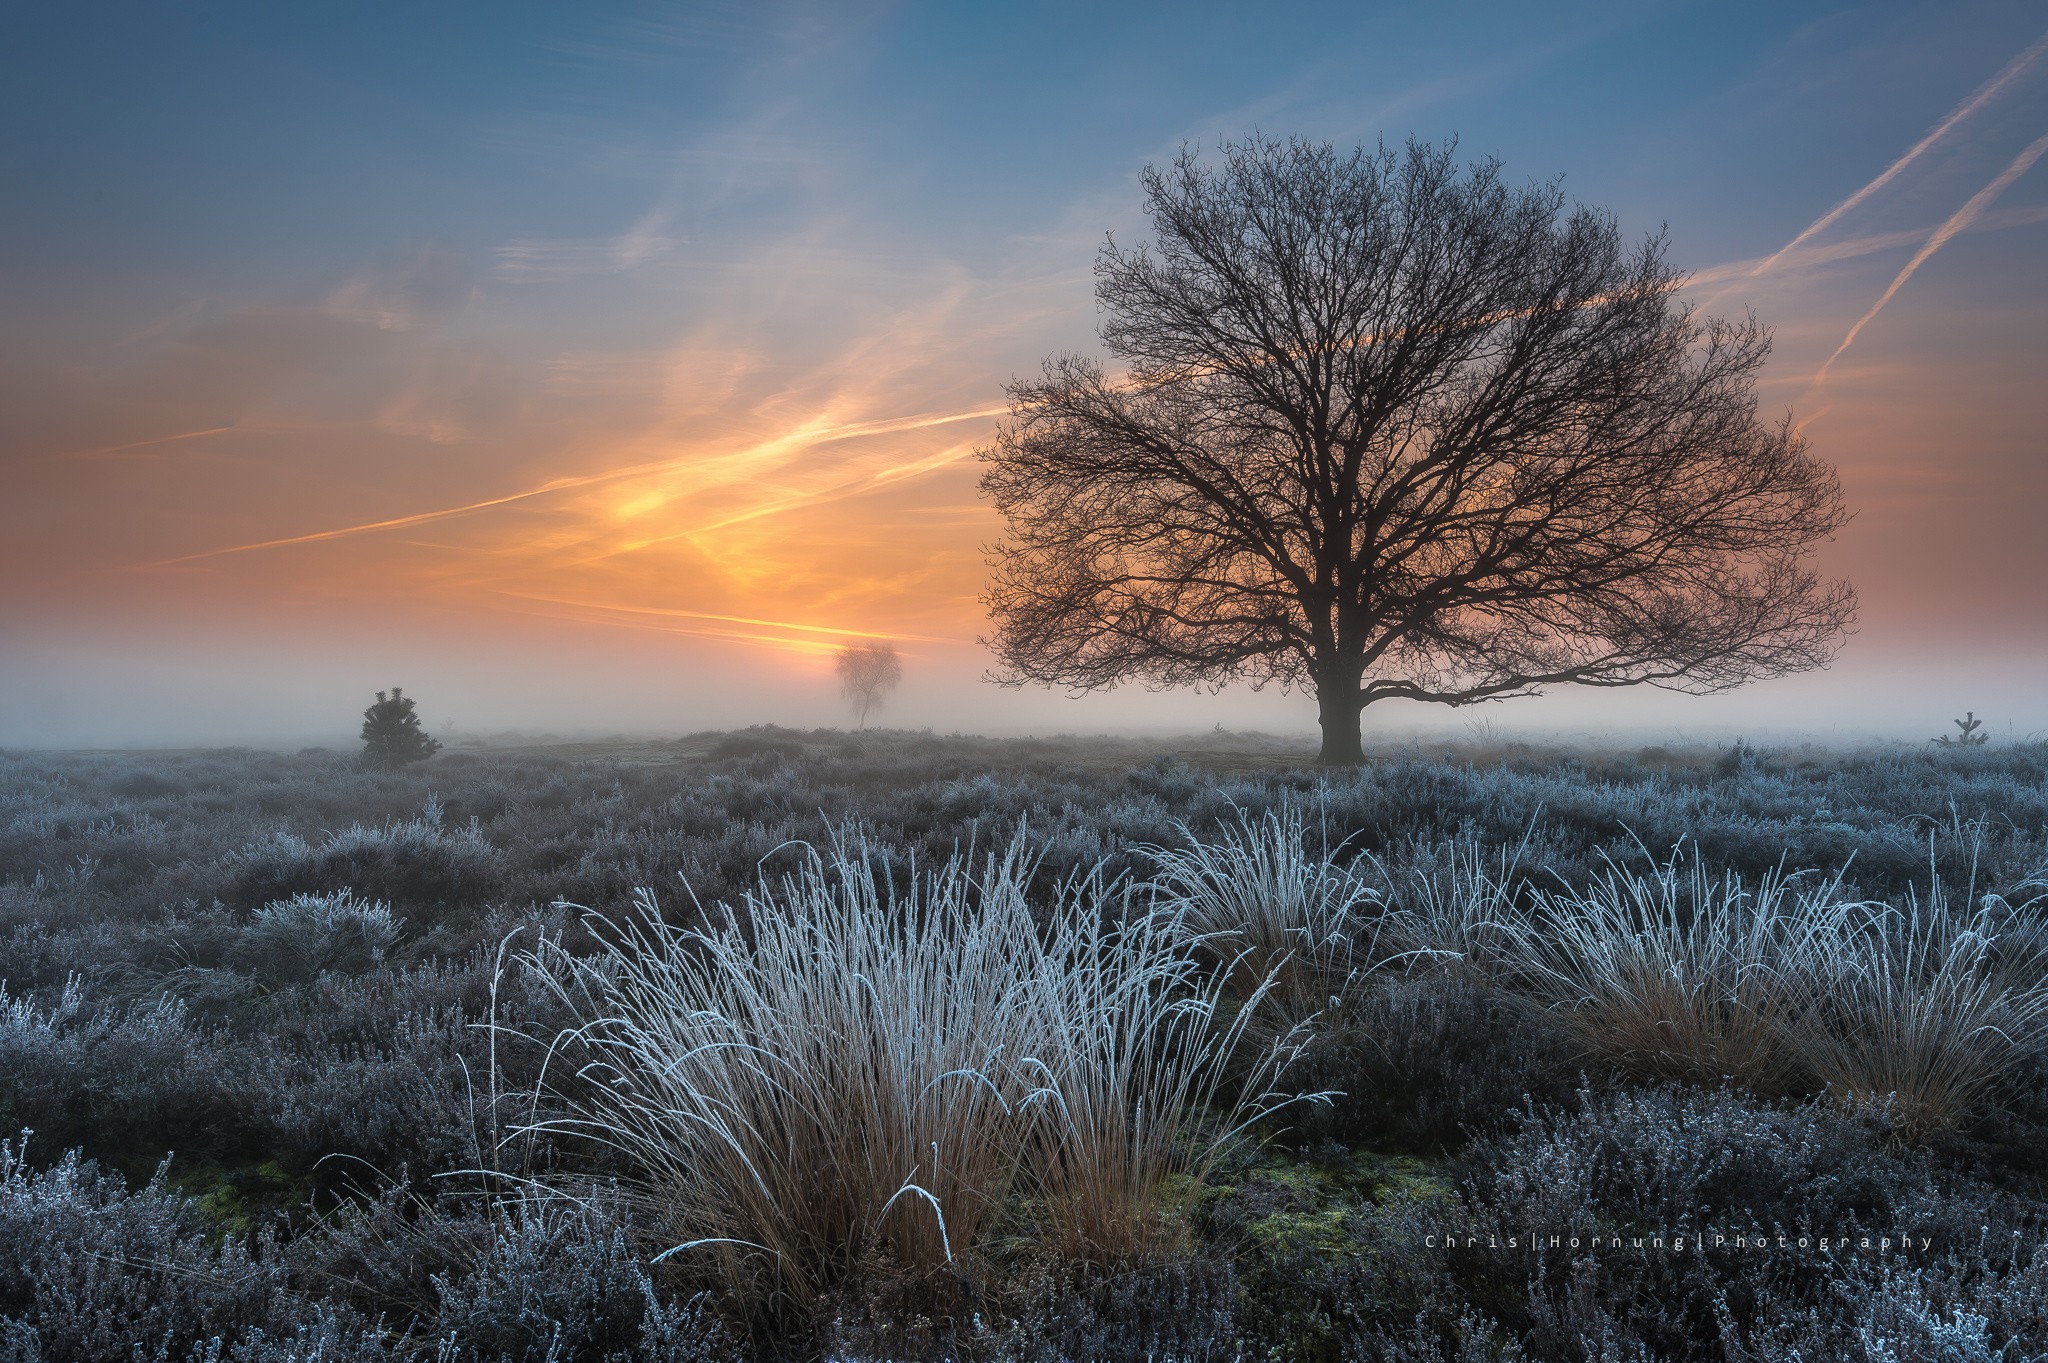 General 2048x1363 landscape trees field frost mist sunrise winter morning nature cold outdoors watermarked